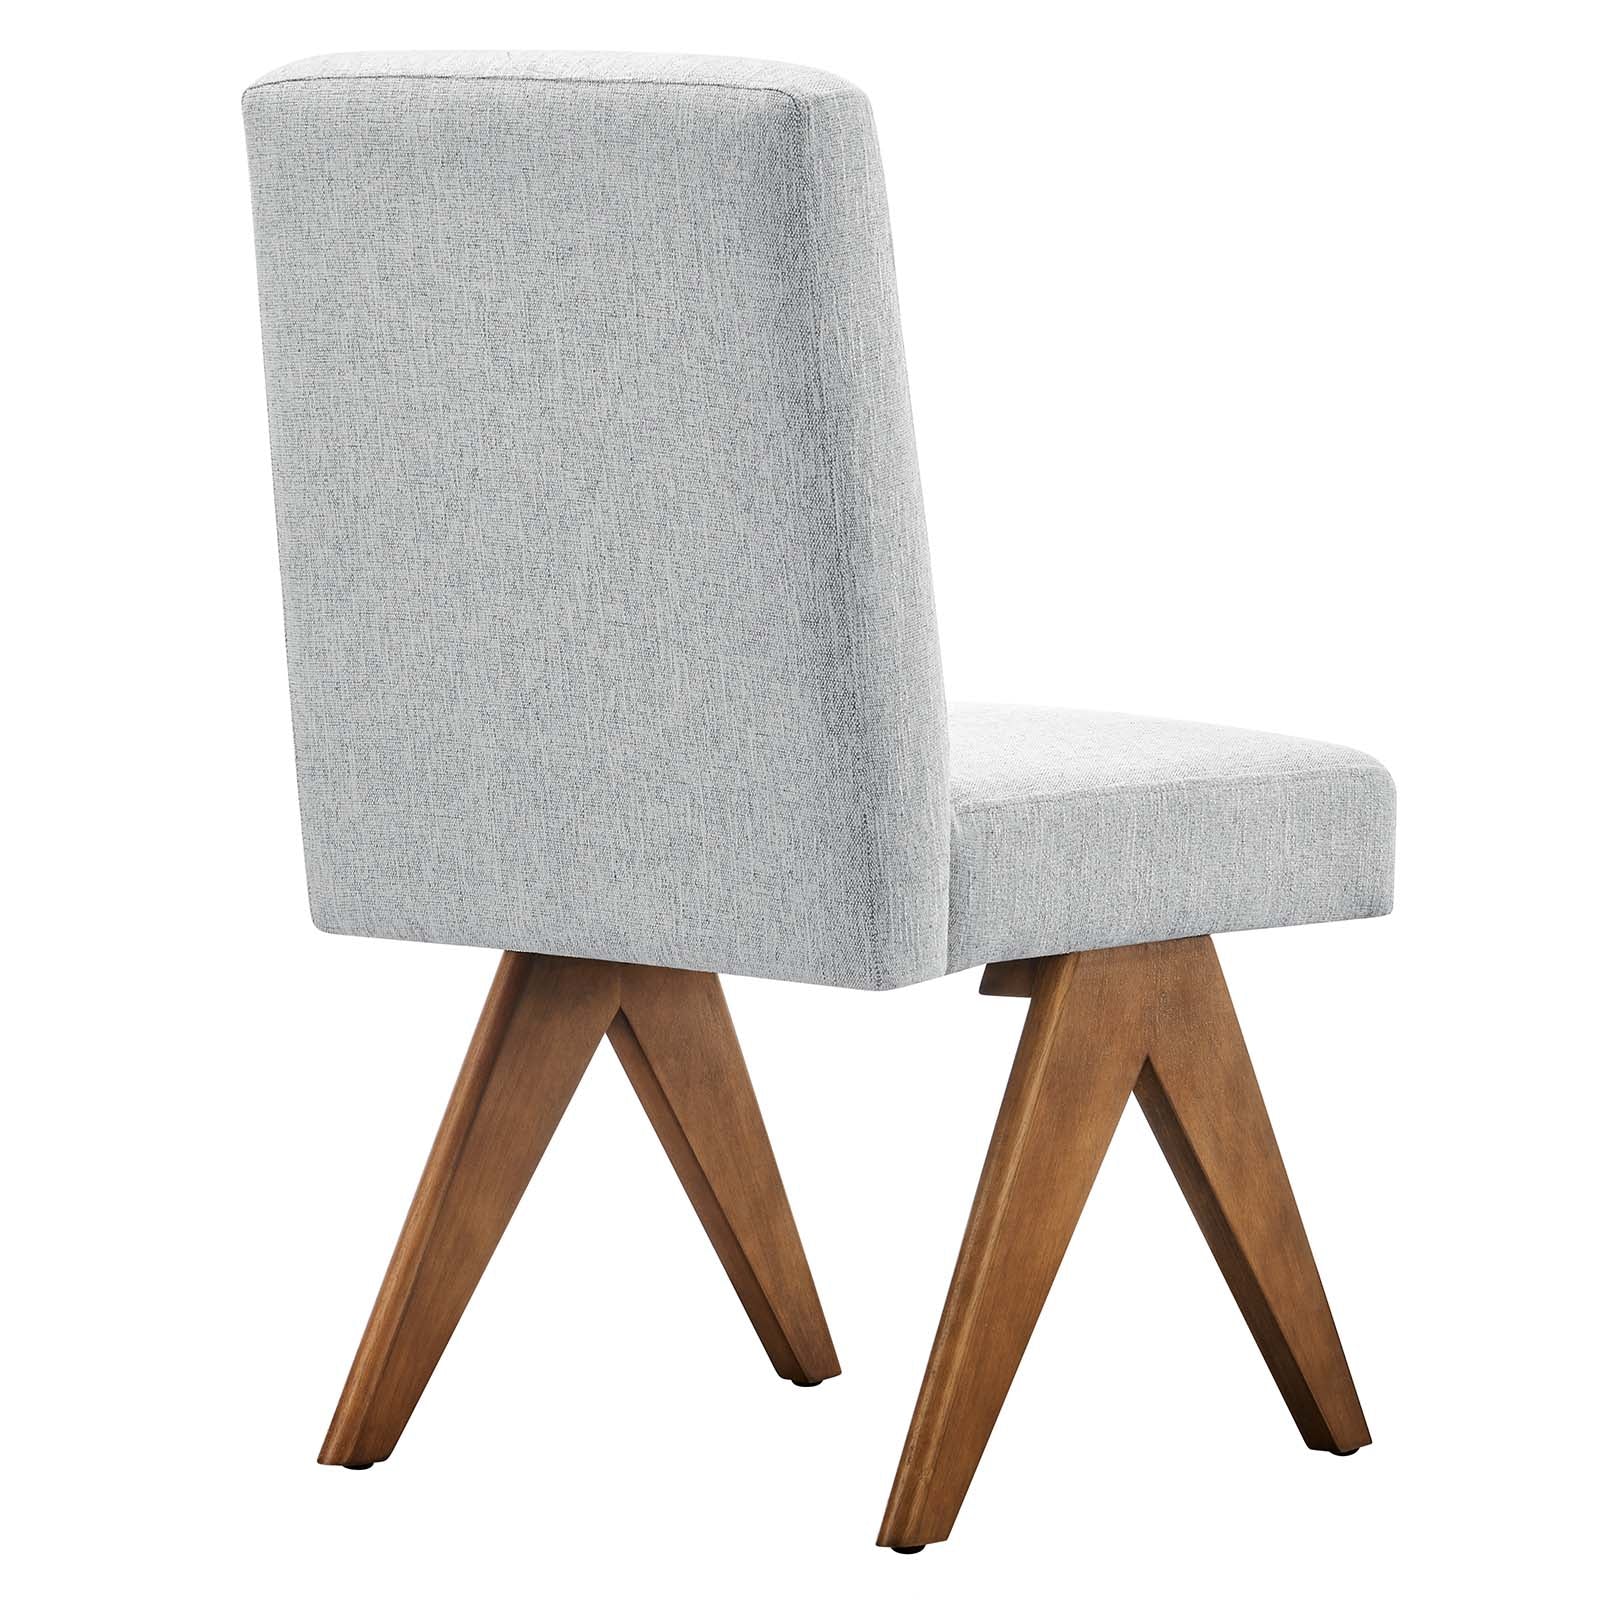 Lyra Fabric Dining Room Side Chair - Set of 2